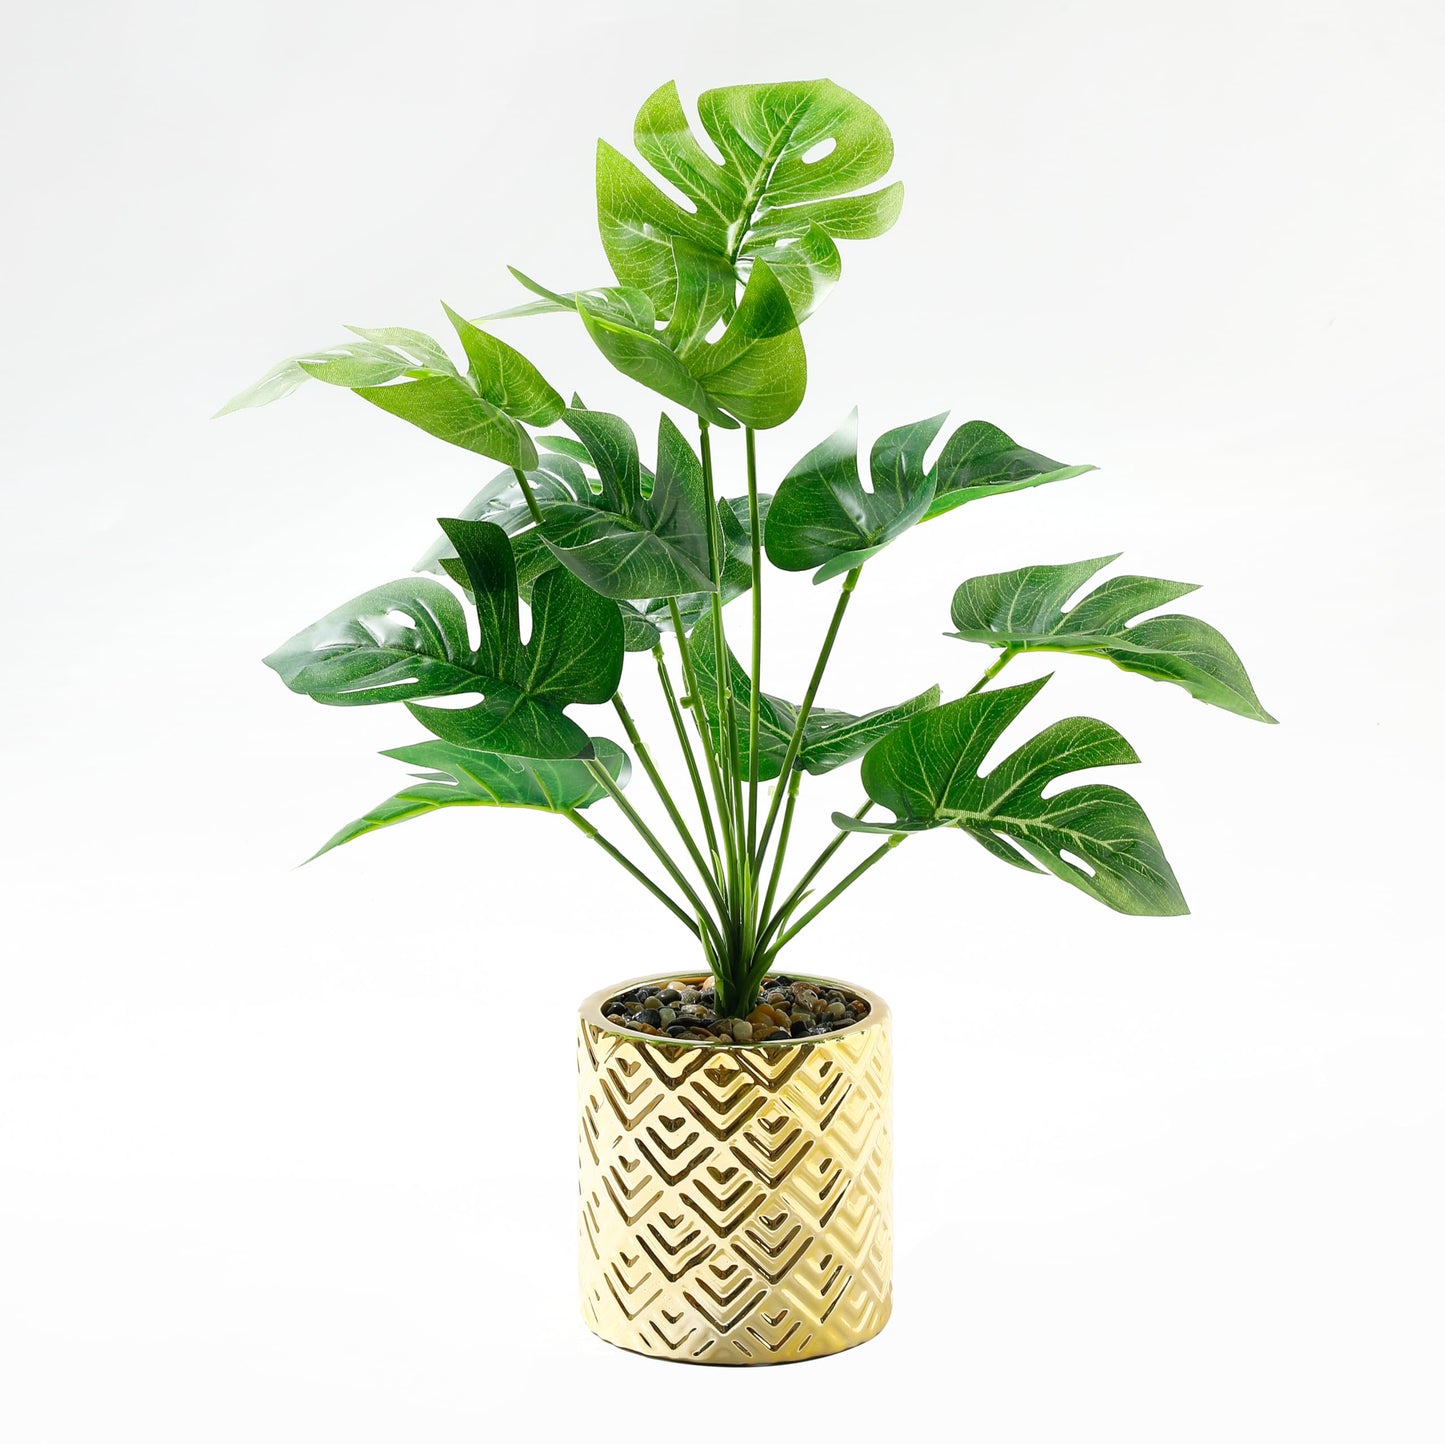 Ekhasa Monstera Artificial Plants for Home Decor with Pot (37 CM, 12 Leaves) | Fake Faux False Show Decor Indoor Plastic Small Decorative Potted Plant for Living Room, Kitchen, Bathroom